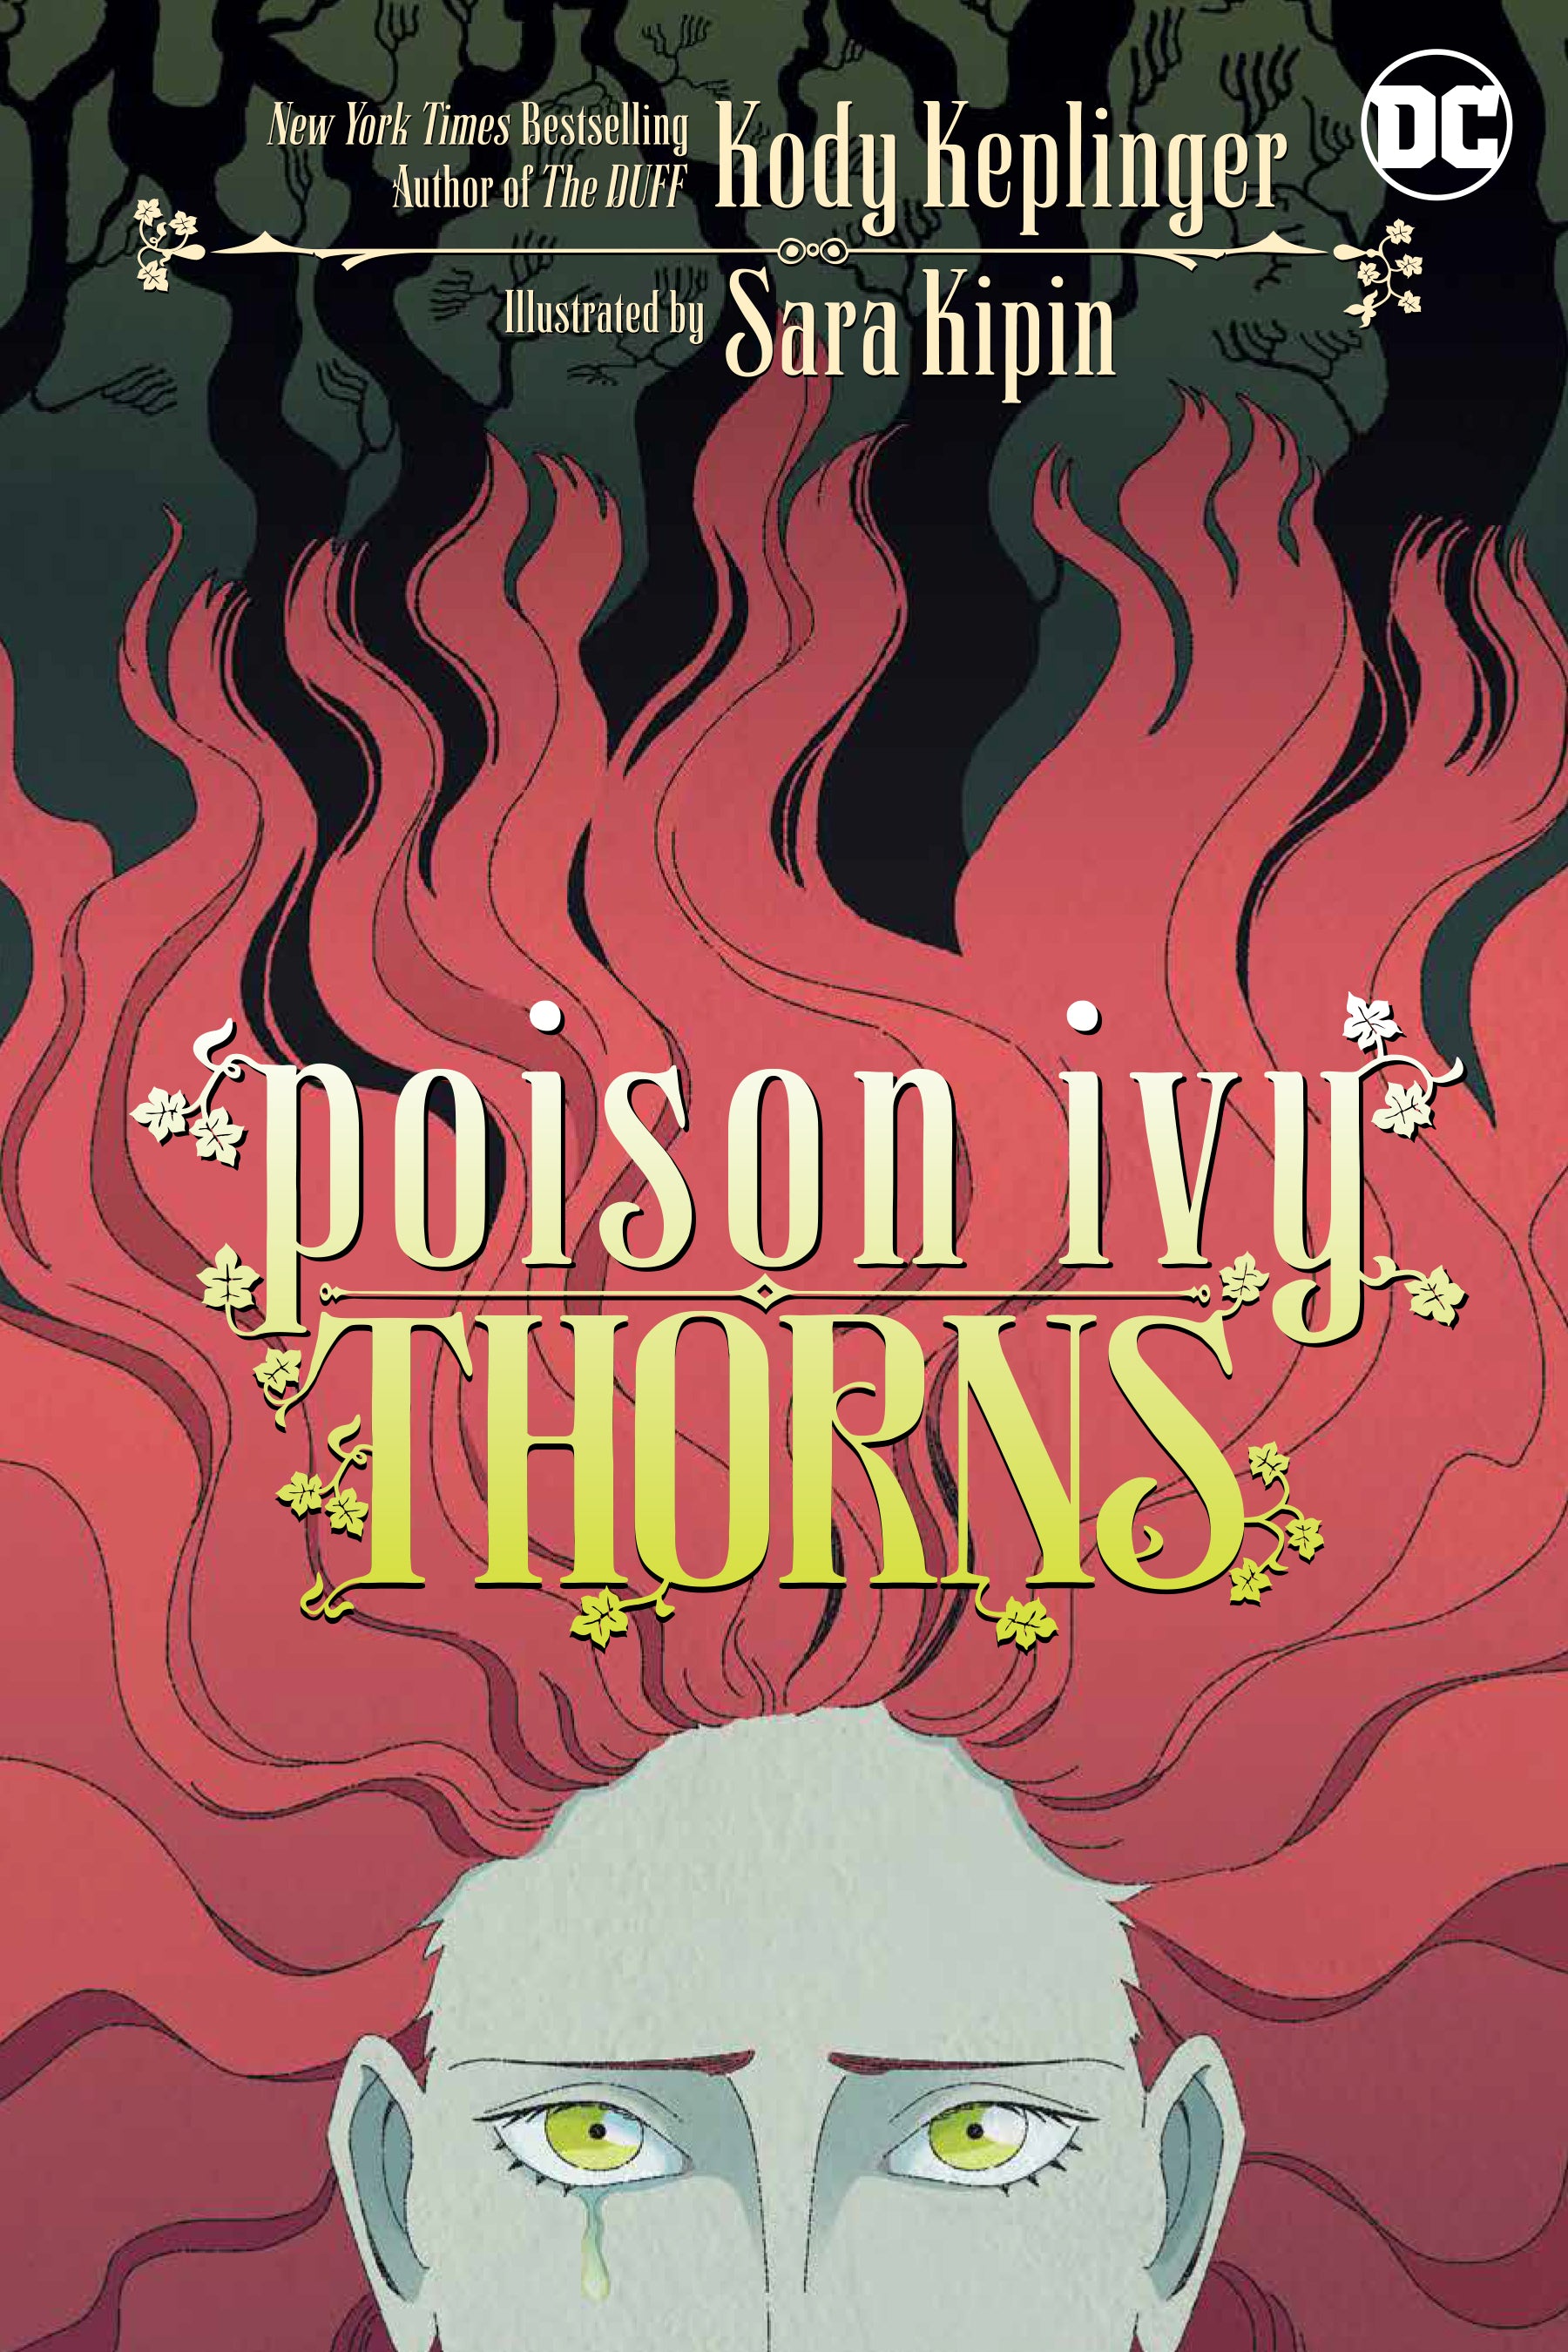 POISON IVY THORNS TRADE PAPERBACK